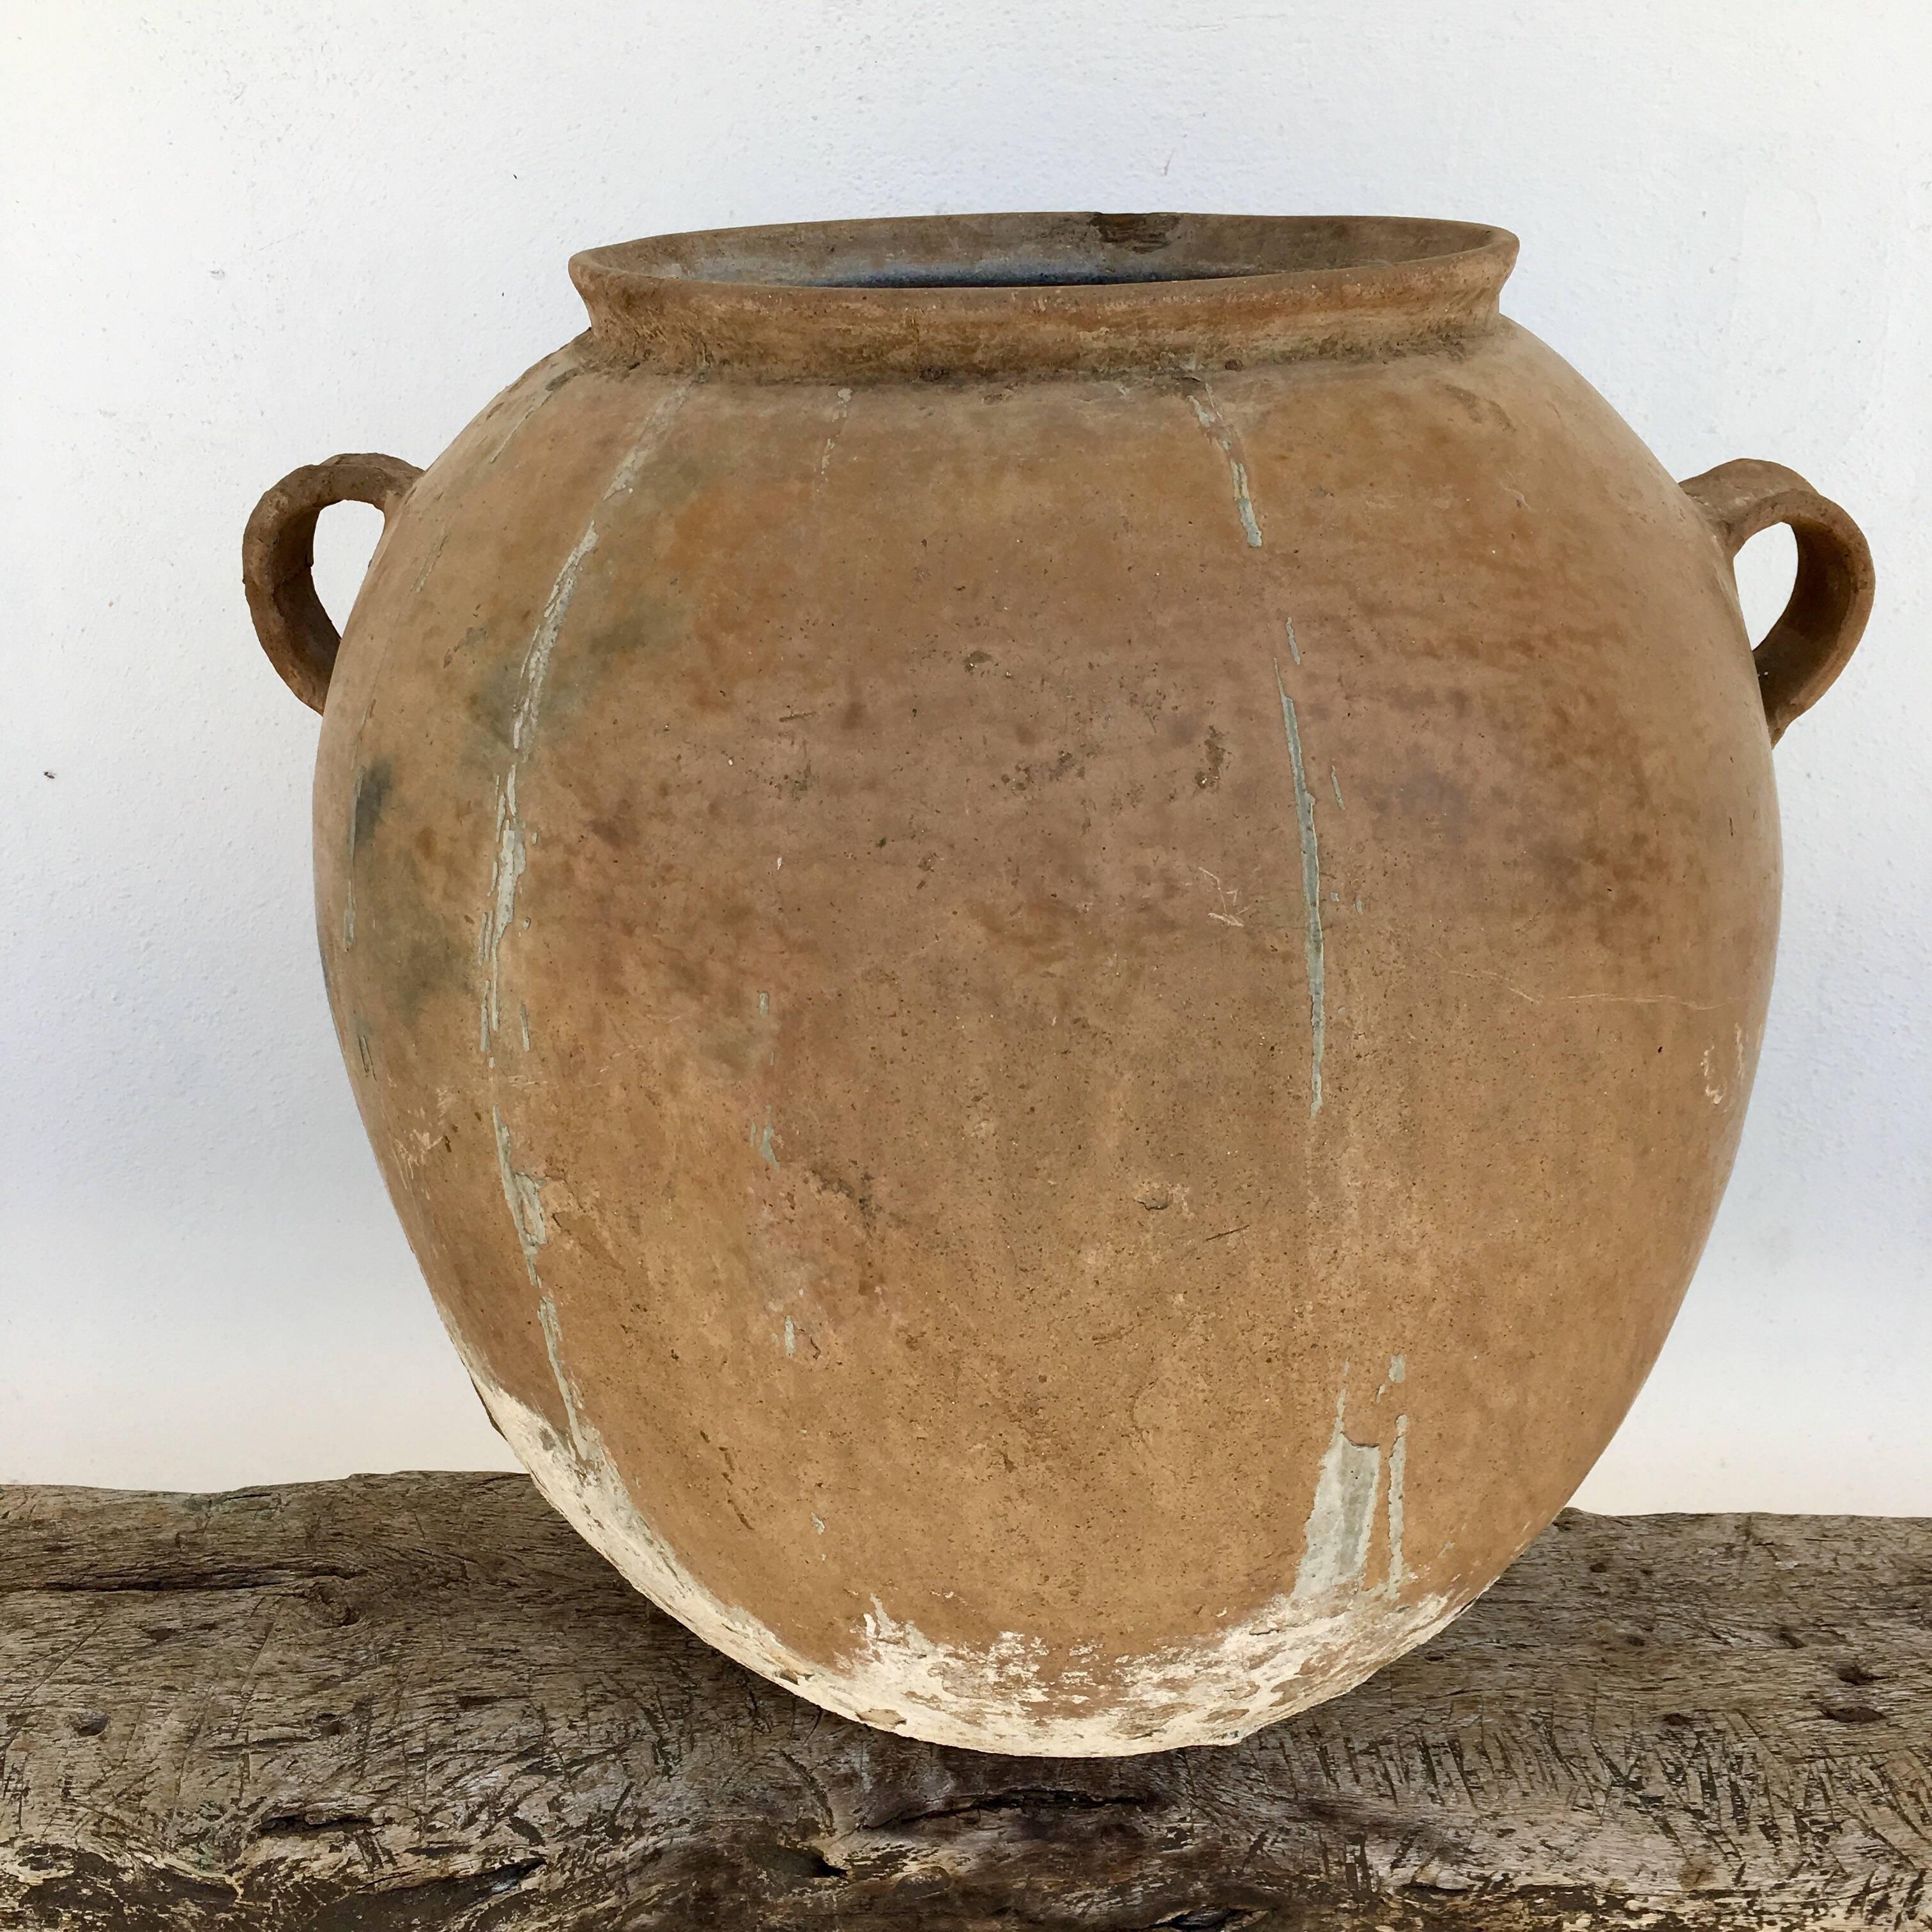 Rustic Terracotta Pot from Central Mexico